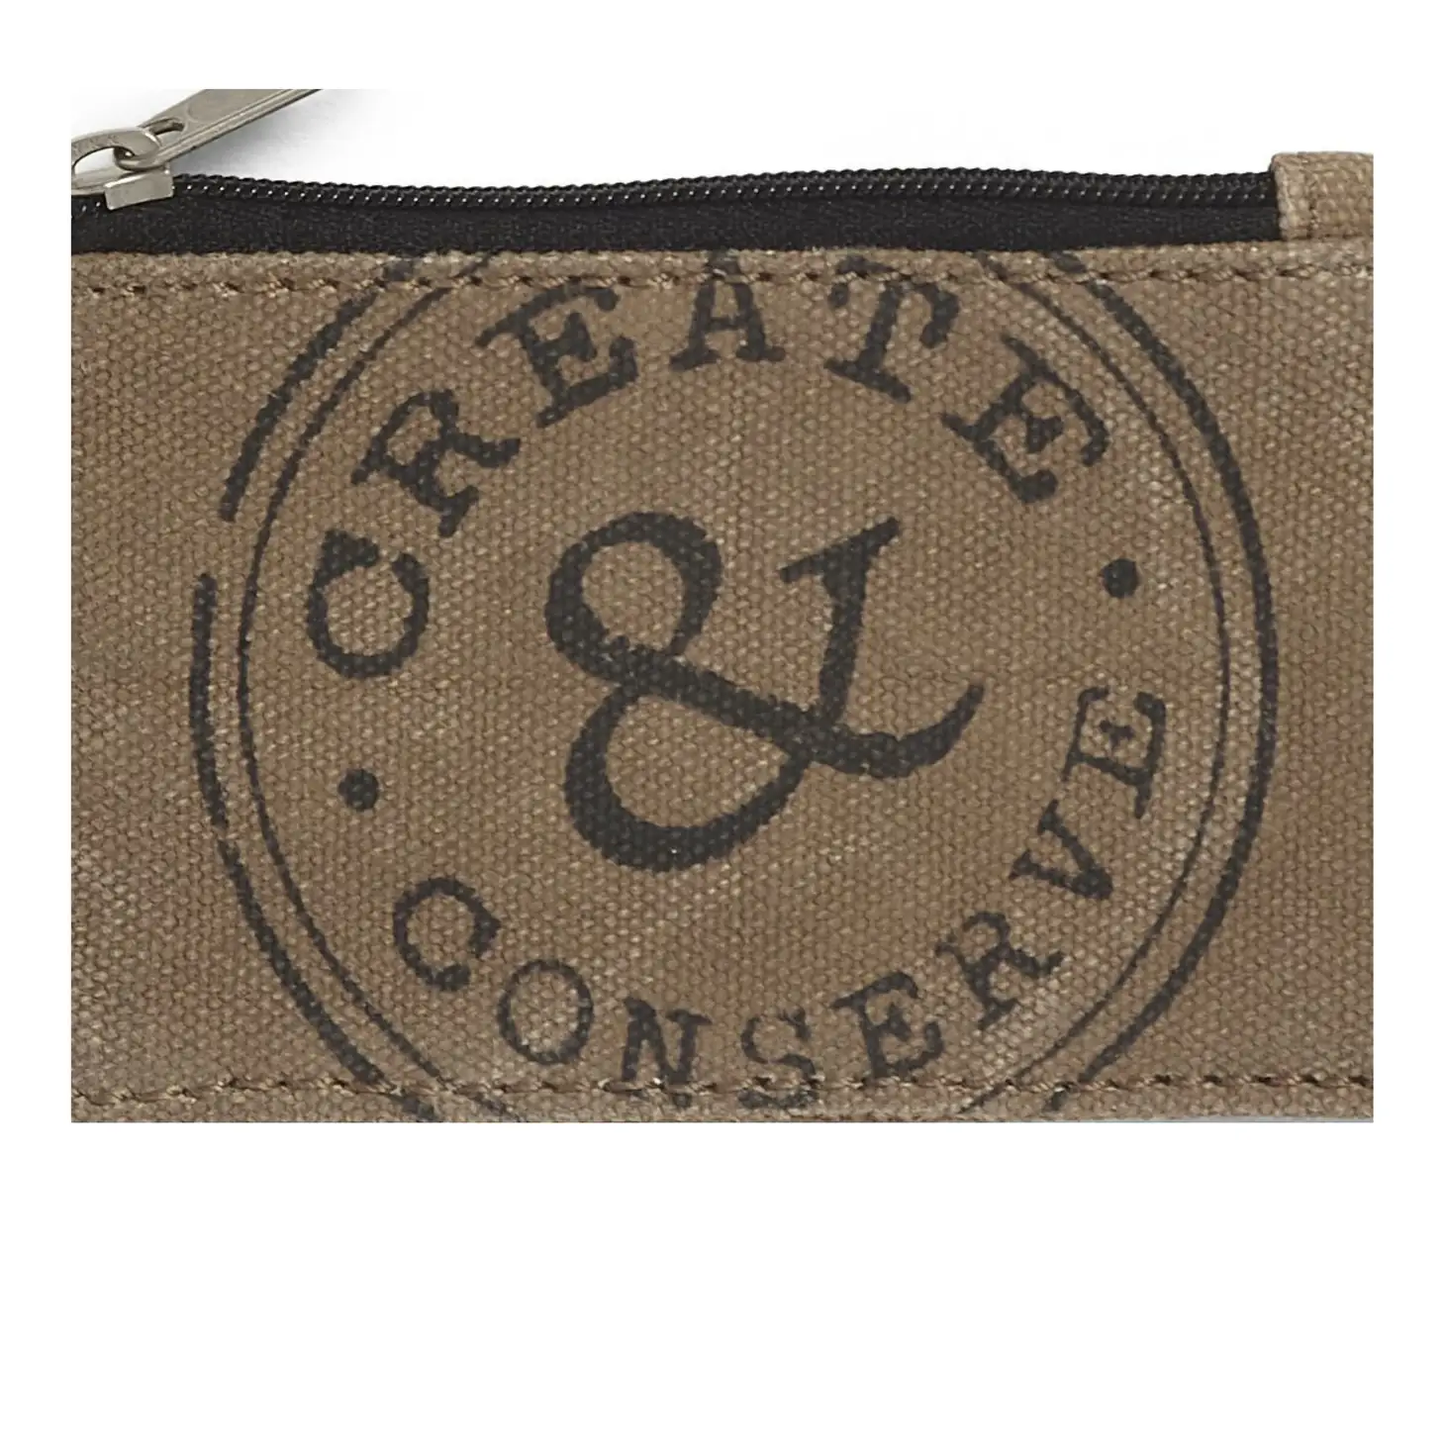 Create & Conserve ID Pouch Keychain